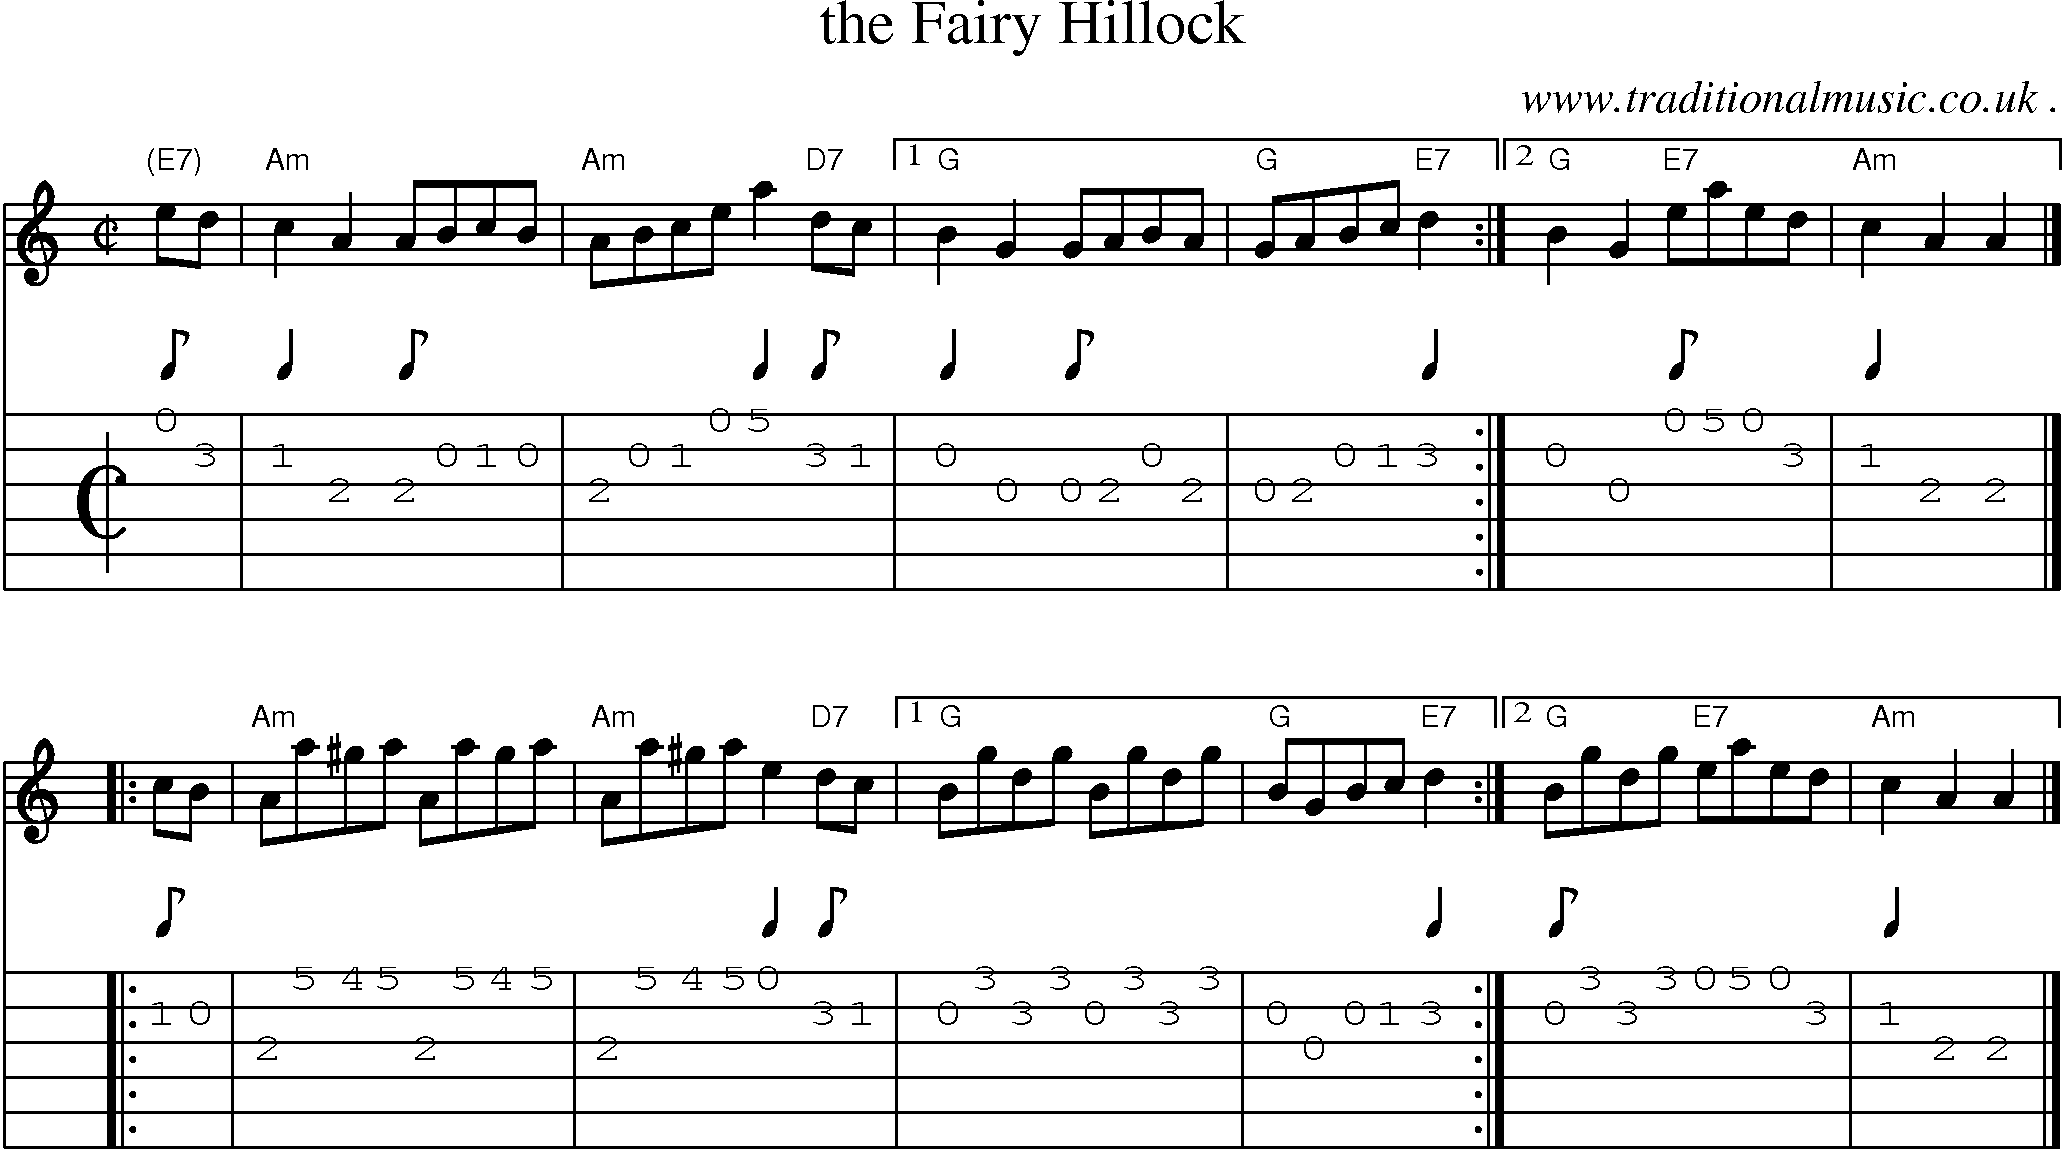 Sheet-music  score, Chords and Guitar Tabs for The Fairy Hillock